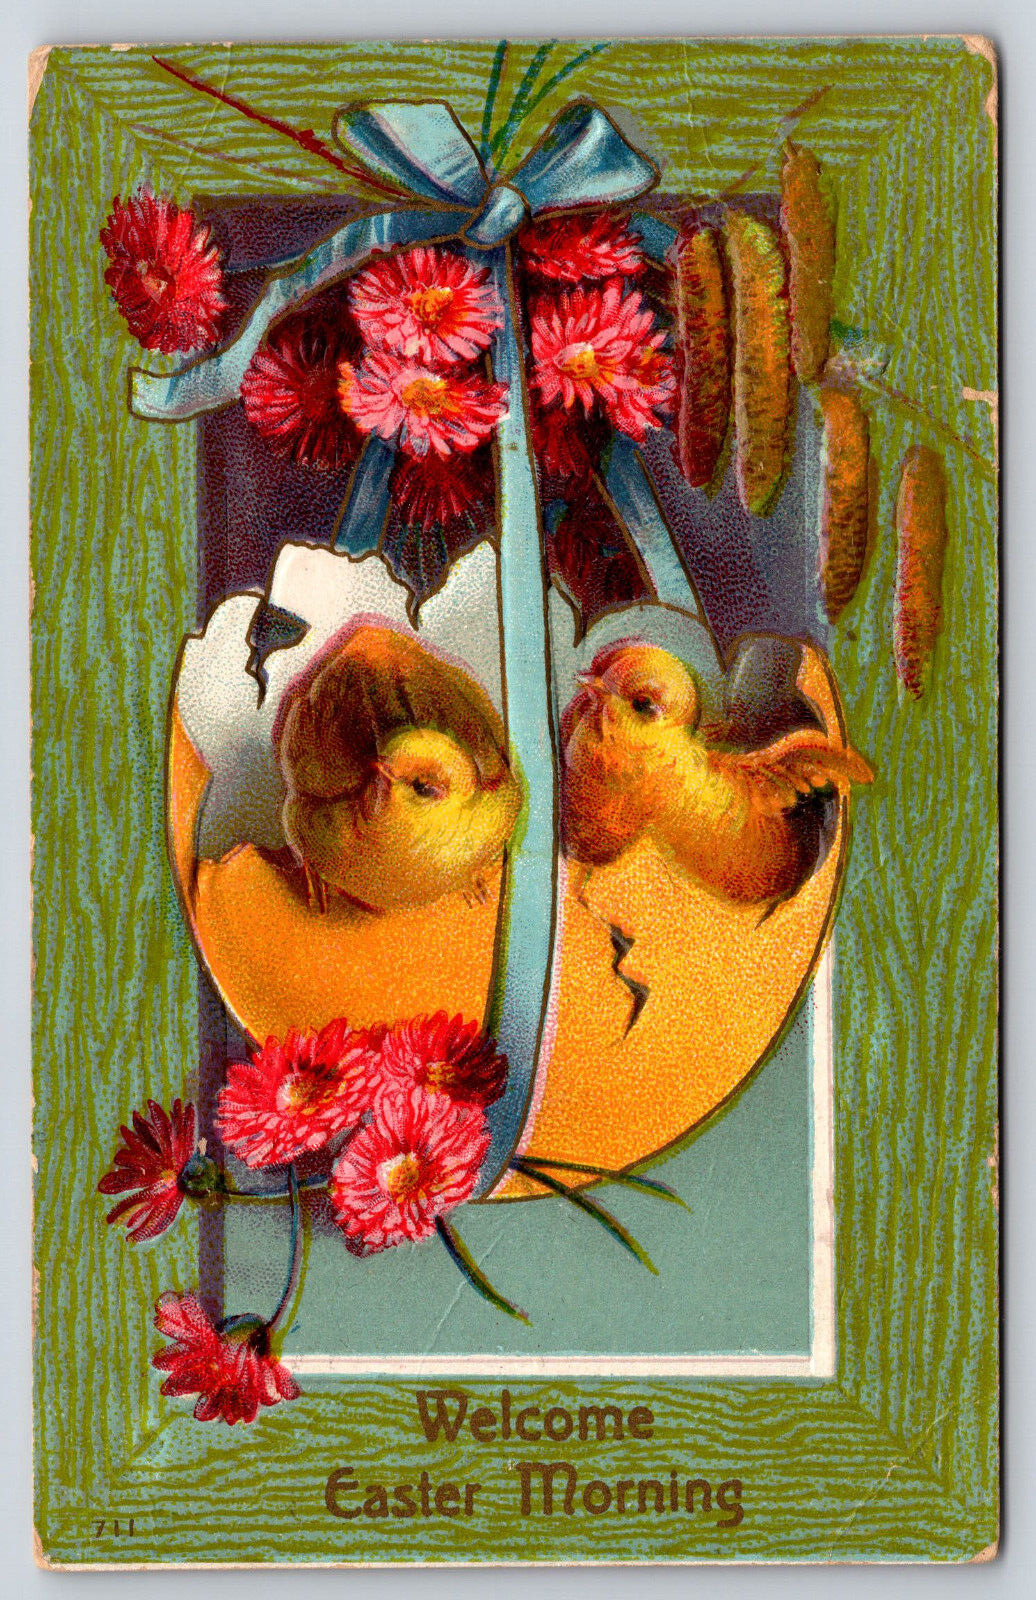 Welcome Easter Morning, Baby Chicks Egg Flowers Bow, Vintage Embossed Postcard